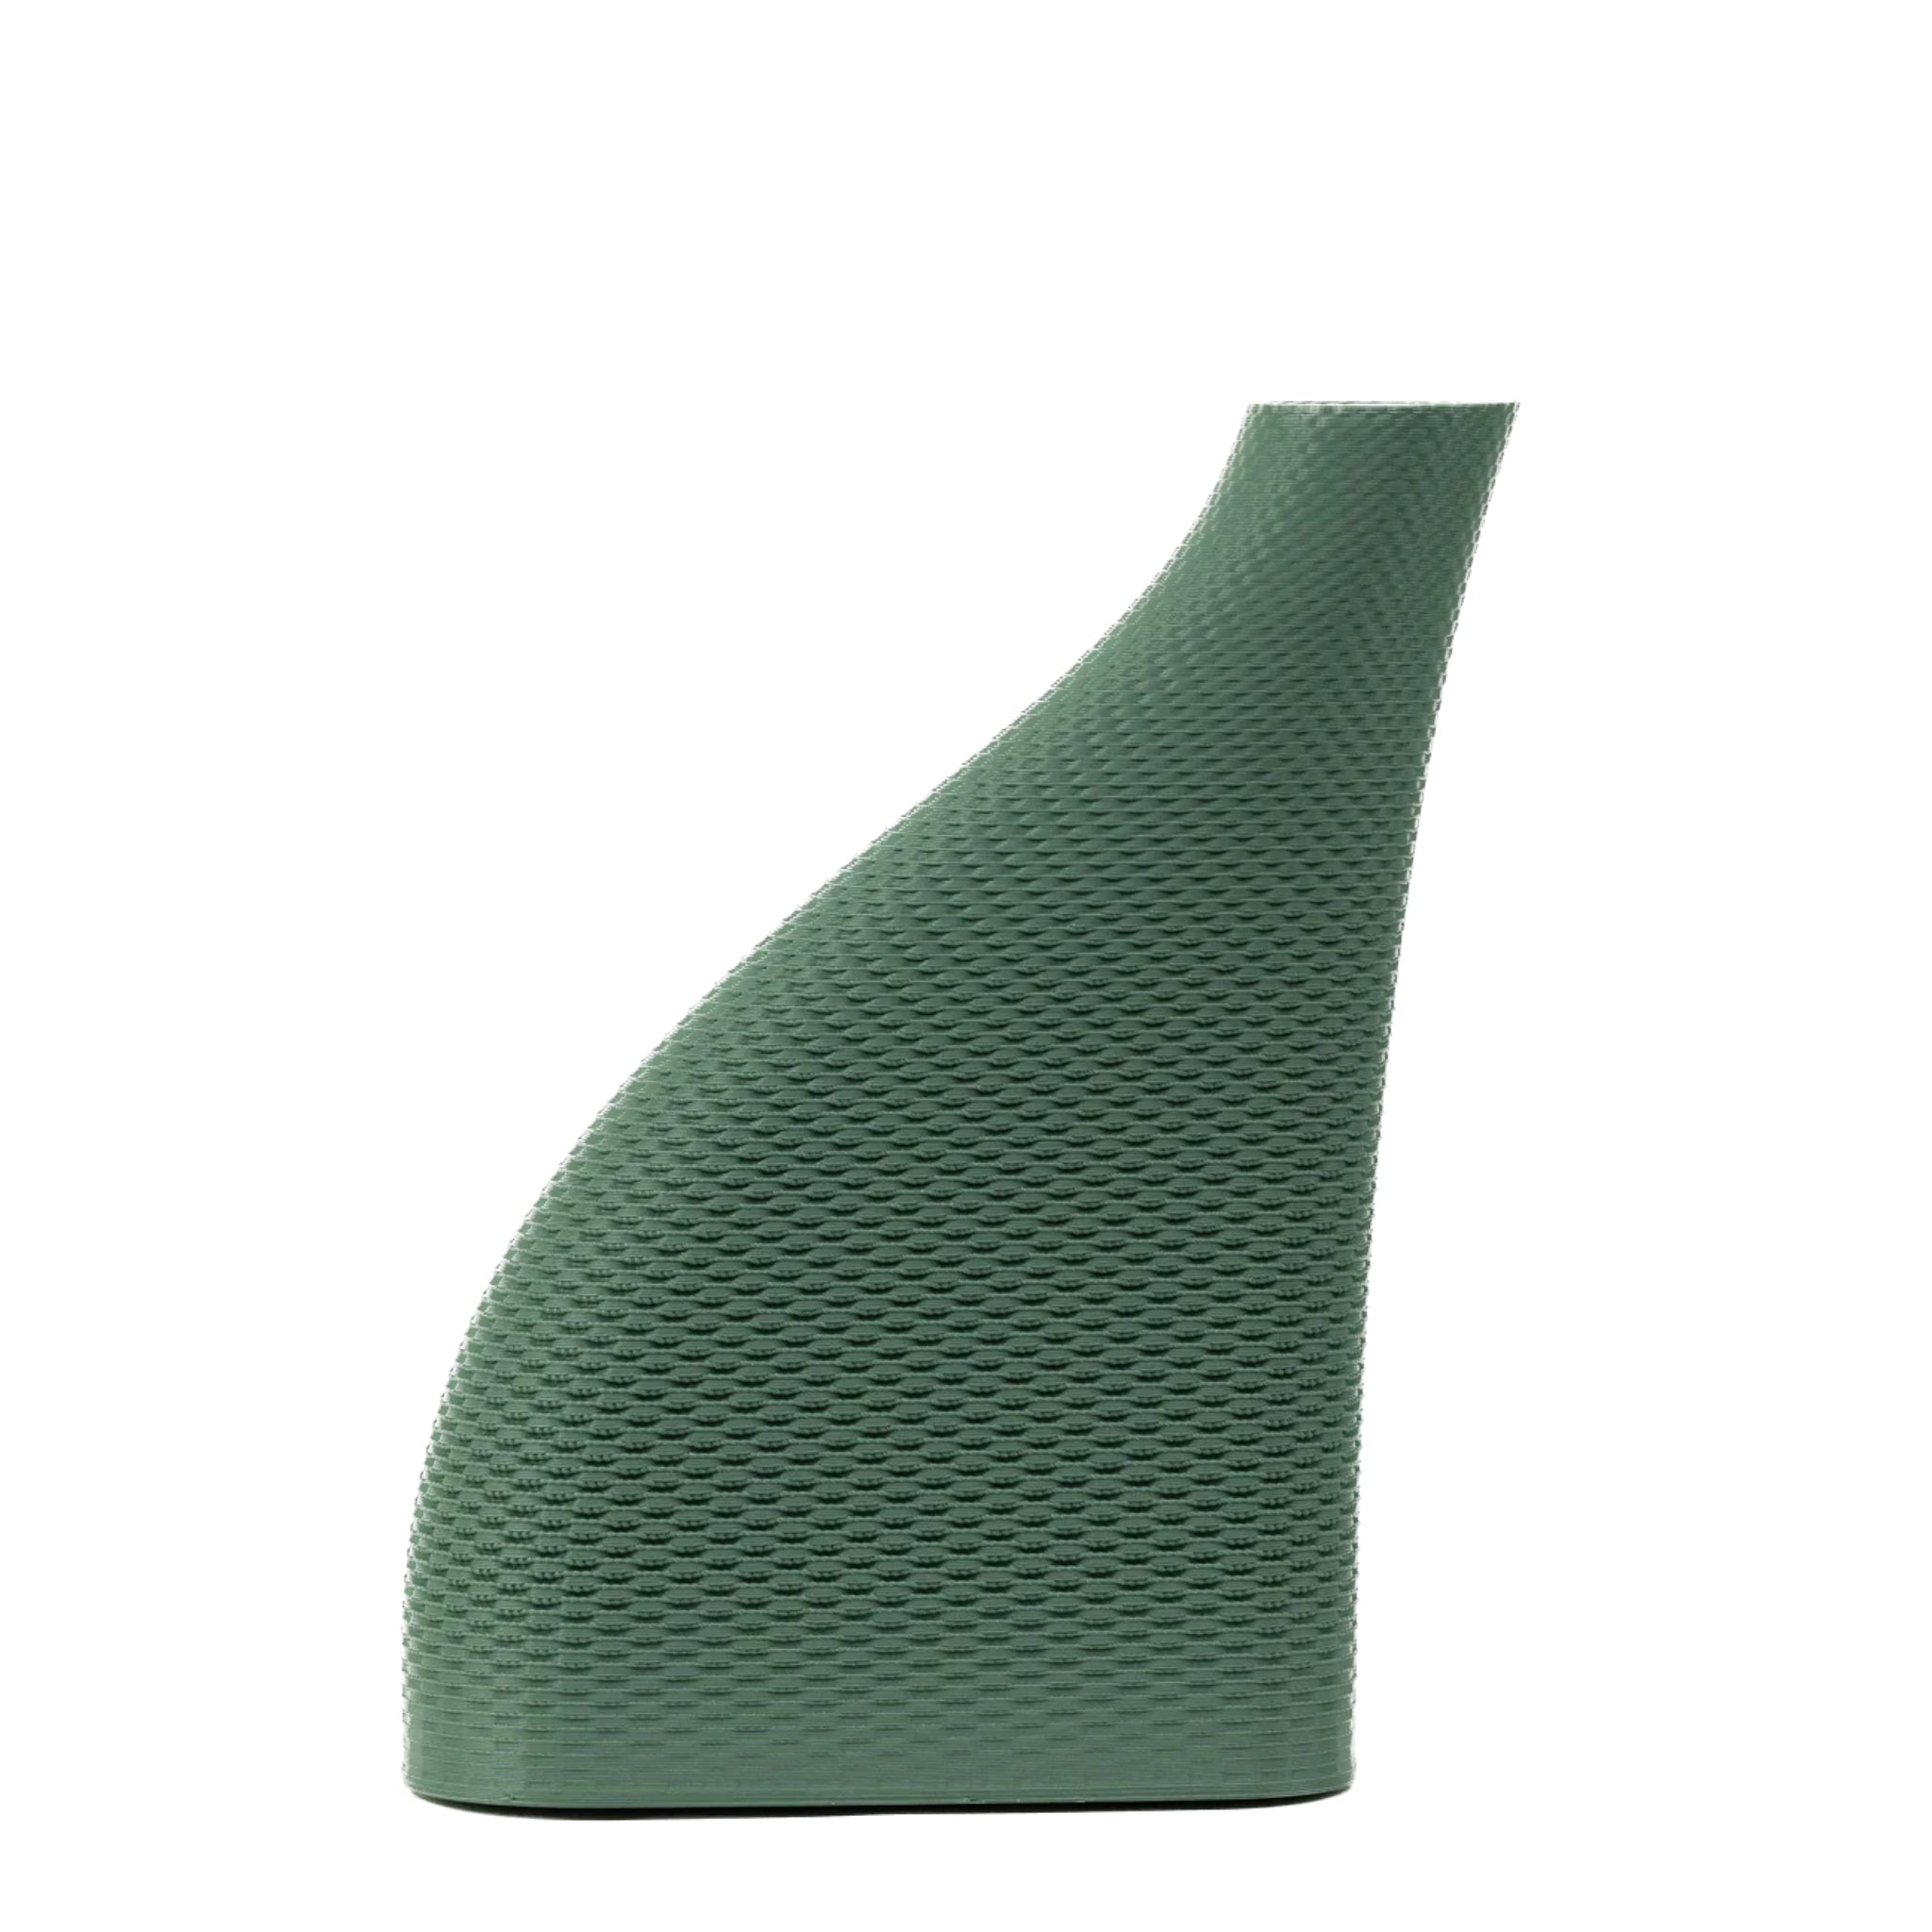 Cyrc wicker vase in green. 3D printed recycled plastic. Product placed in front of a white background